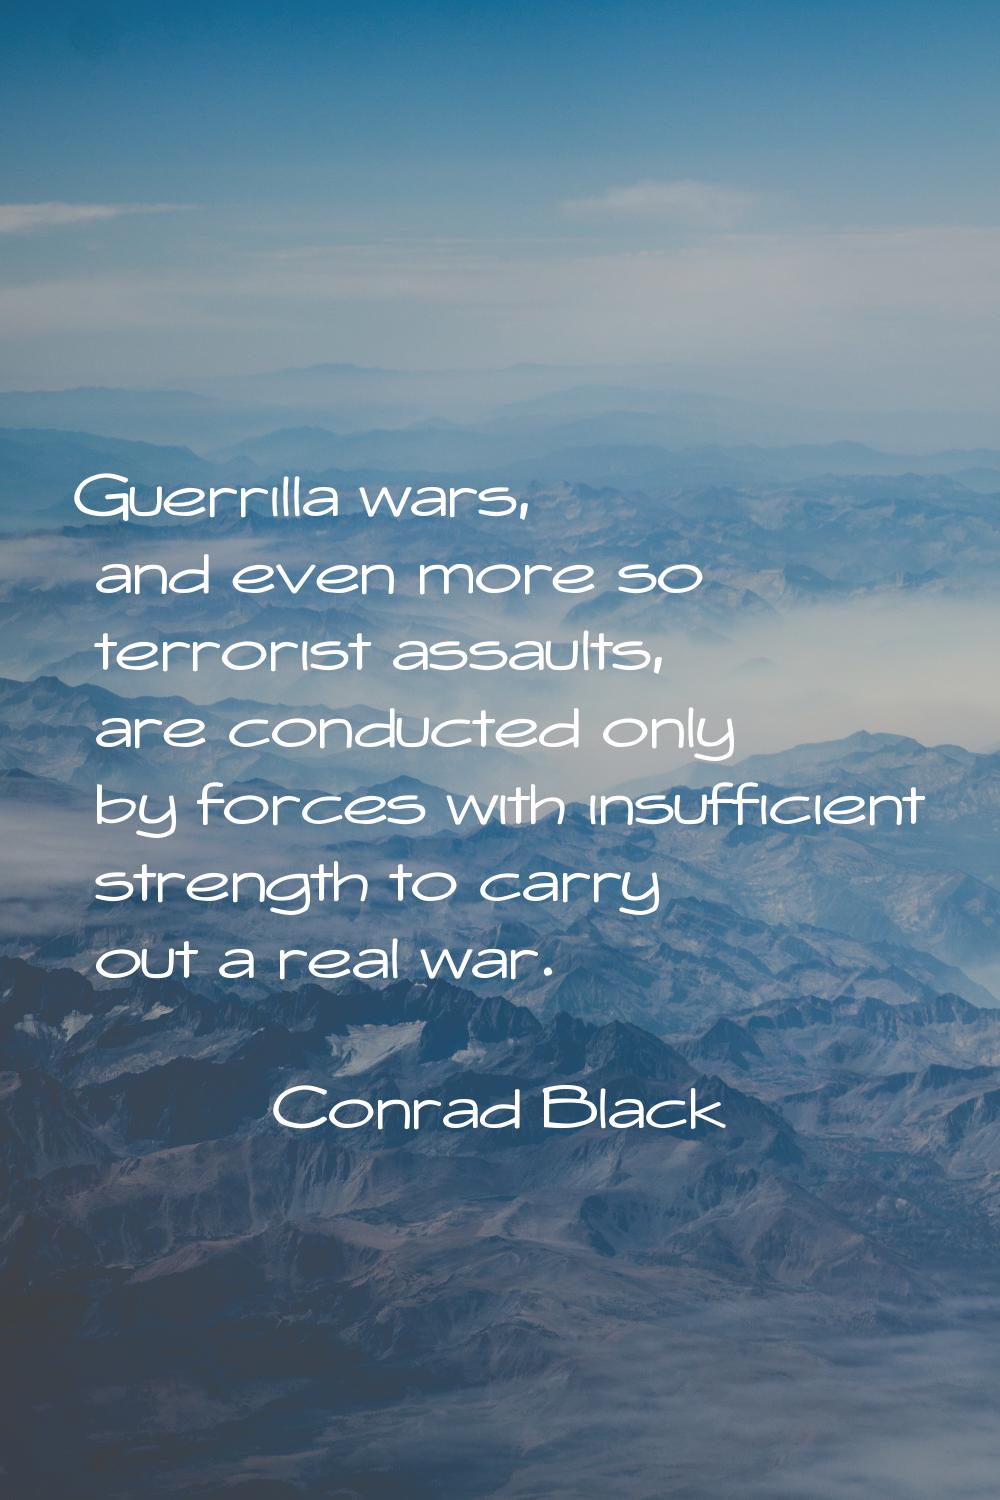 Guerrilla wars, and even more so terrorist assaults, are conducted only by forces with insufficient